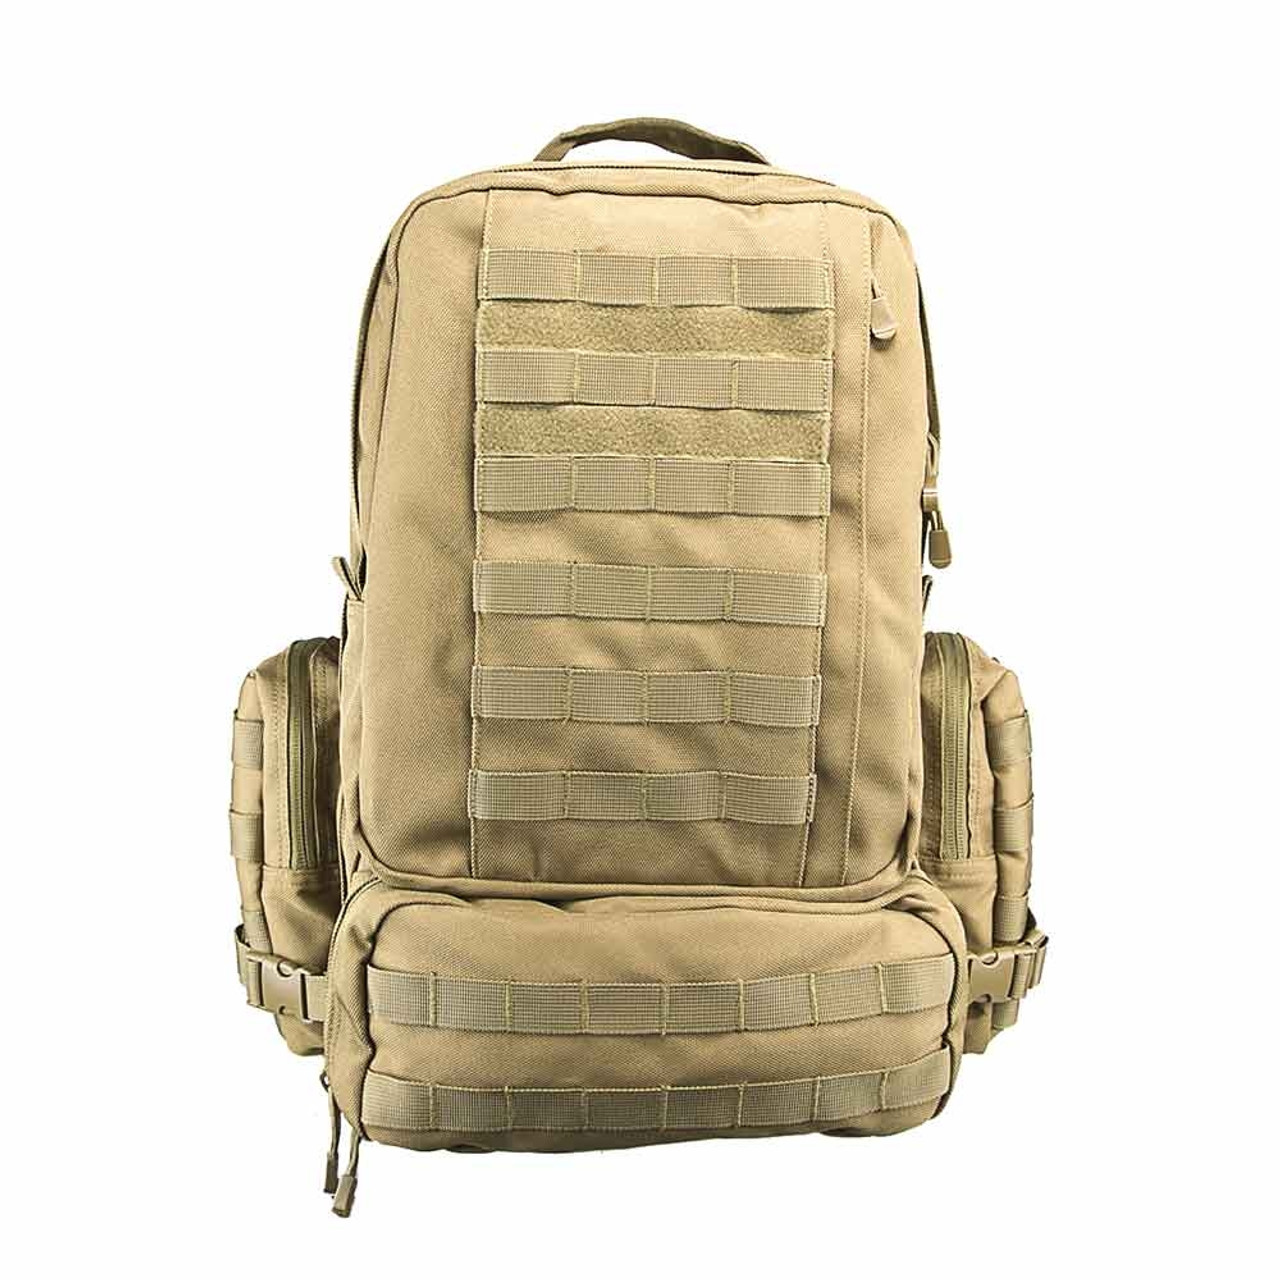 NcSTAR CB3D3013T 3 Day Tactical Camping Hiking Backpack